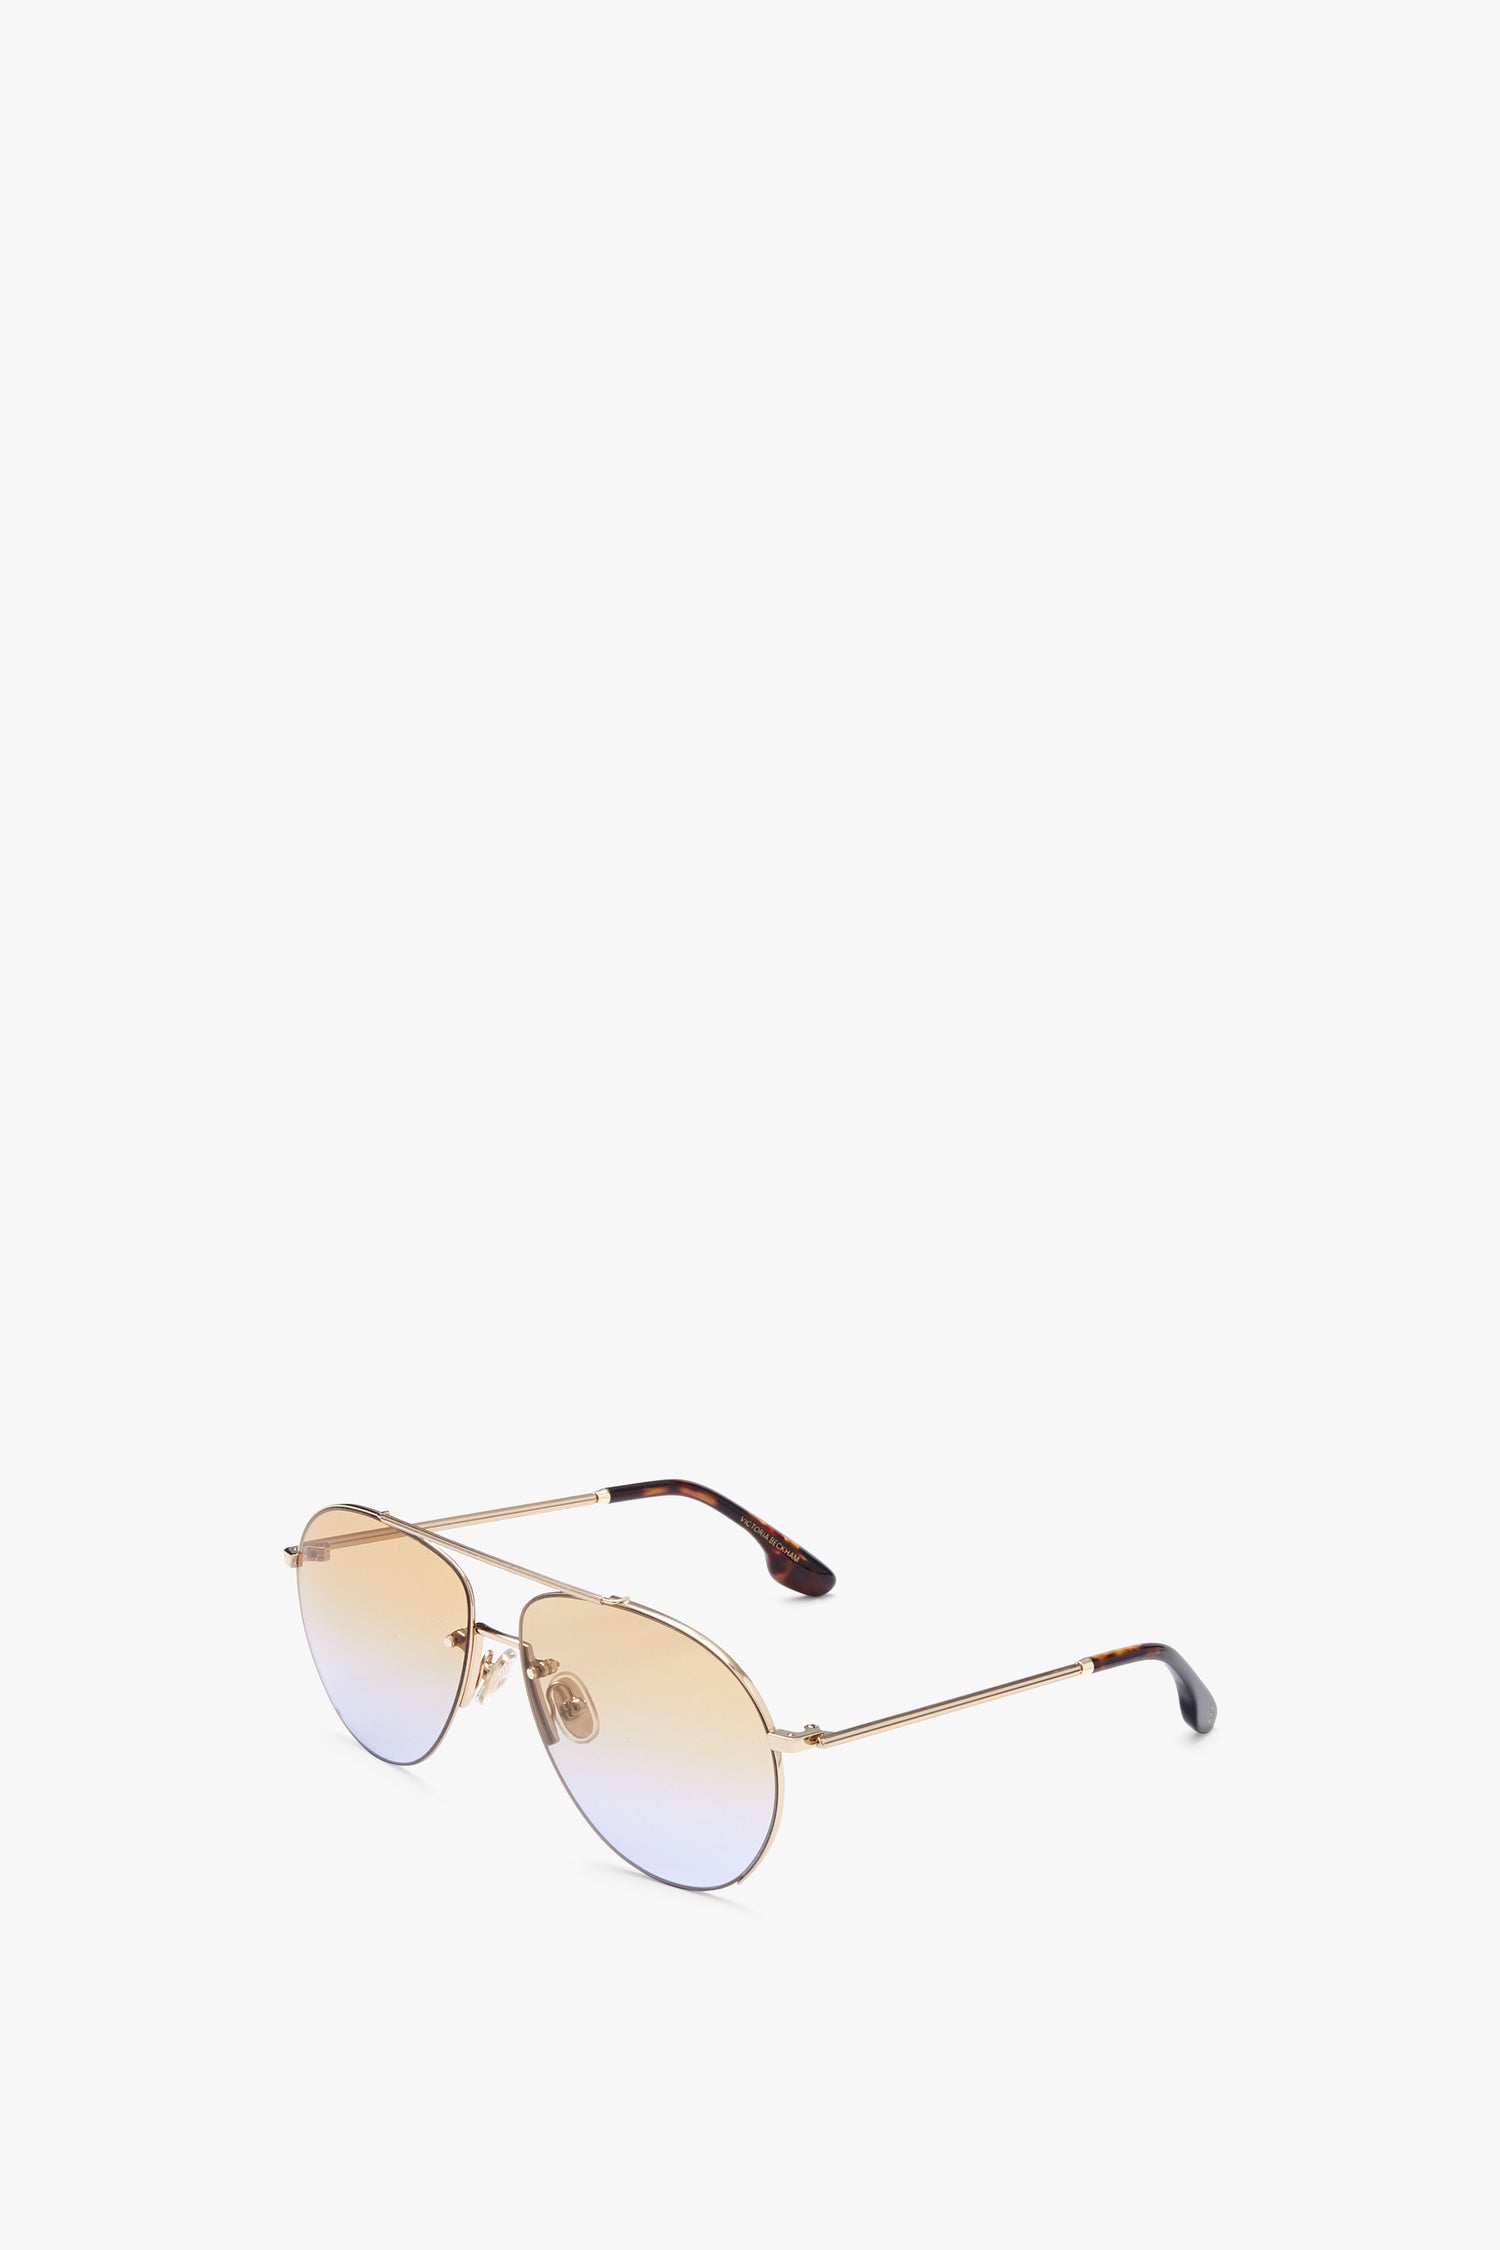 A pair of Fine Aviator in Gold Honey sunglasses by Victoria Beckham with gradient Zeiss lenses and thin gold metal frames, offering UV protection, placed against a white background.